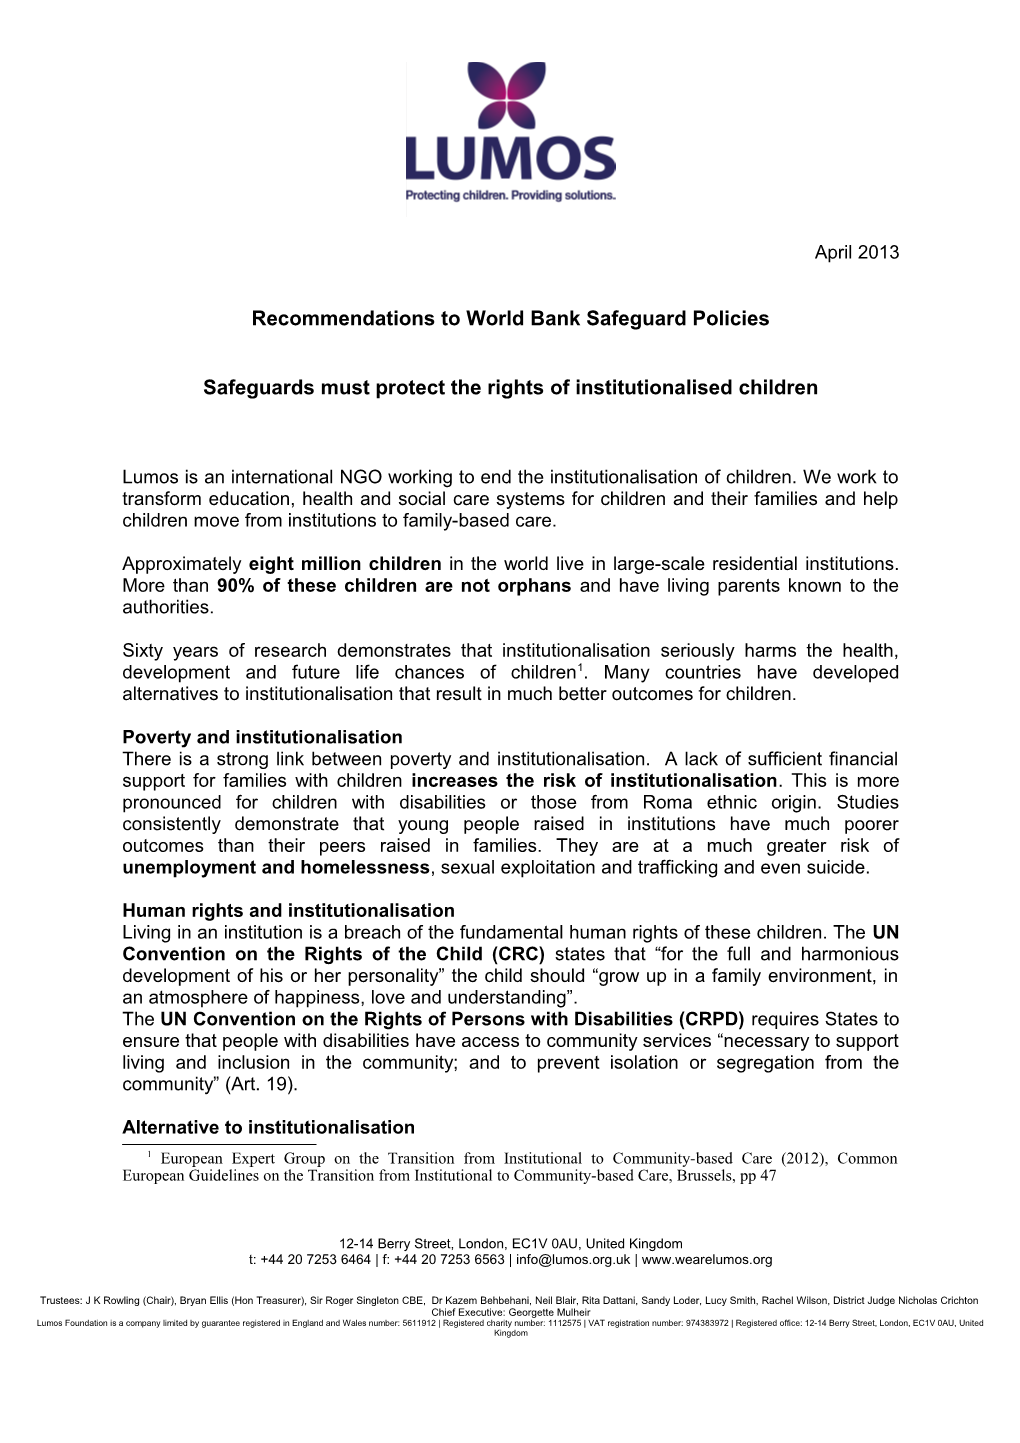 Recommendations to World Bank Safeguard Policies